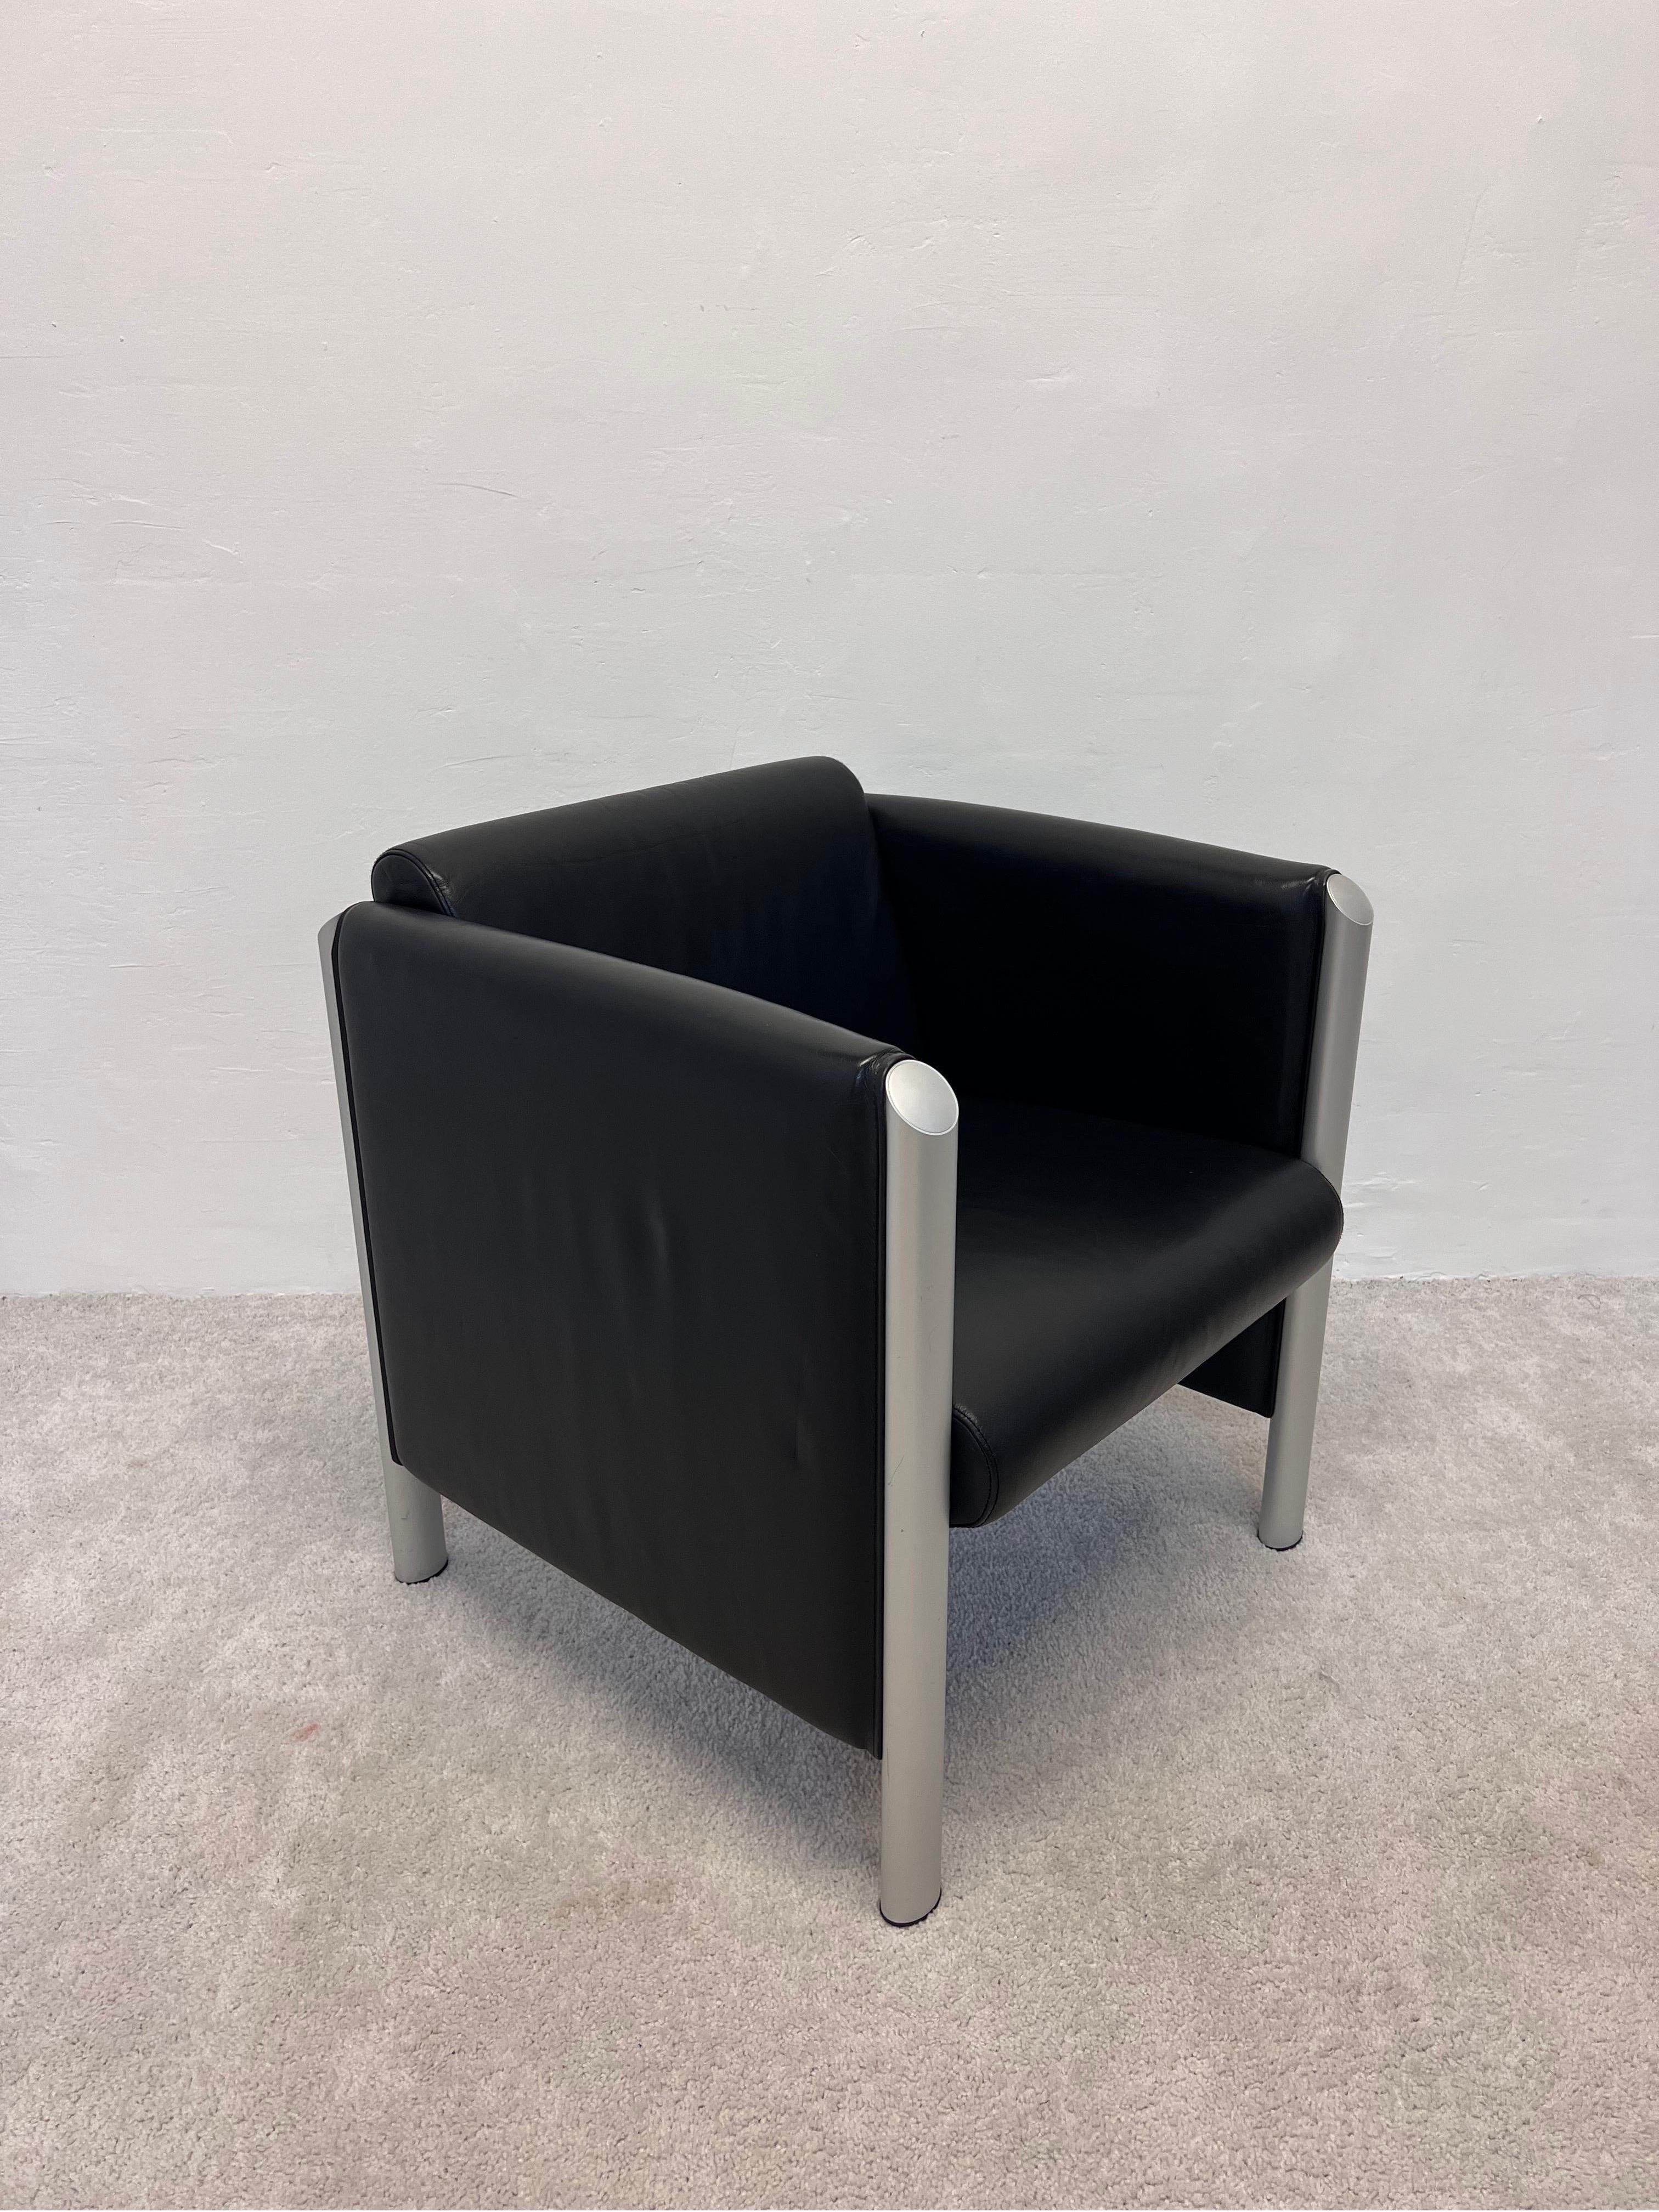 Aluminum Klaus Franck and Werner Sauer 830 Cubis Chairs for Wilkhahn, a Pair For Sale